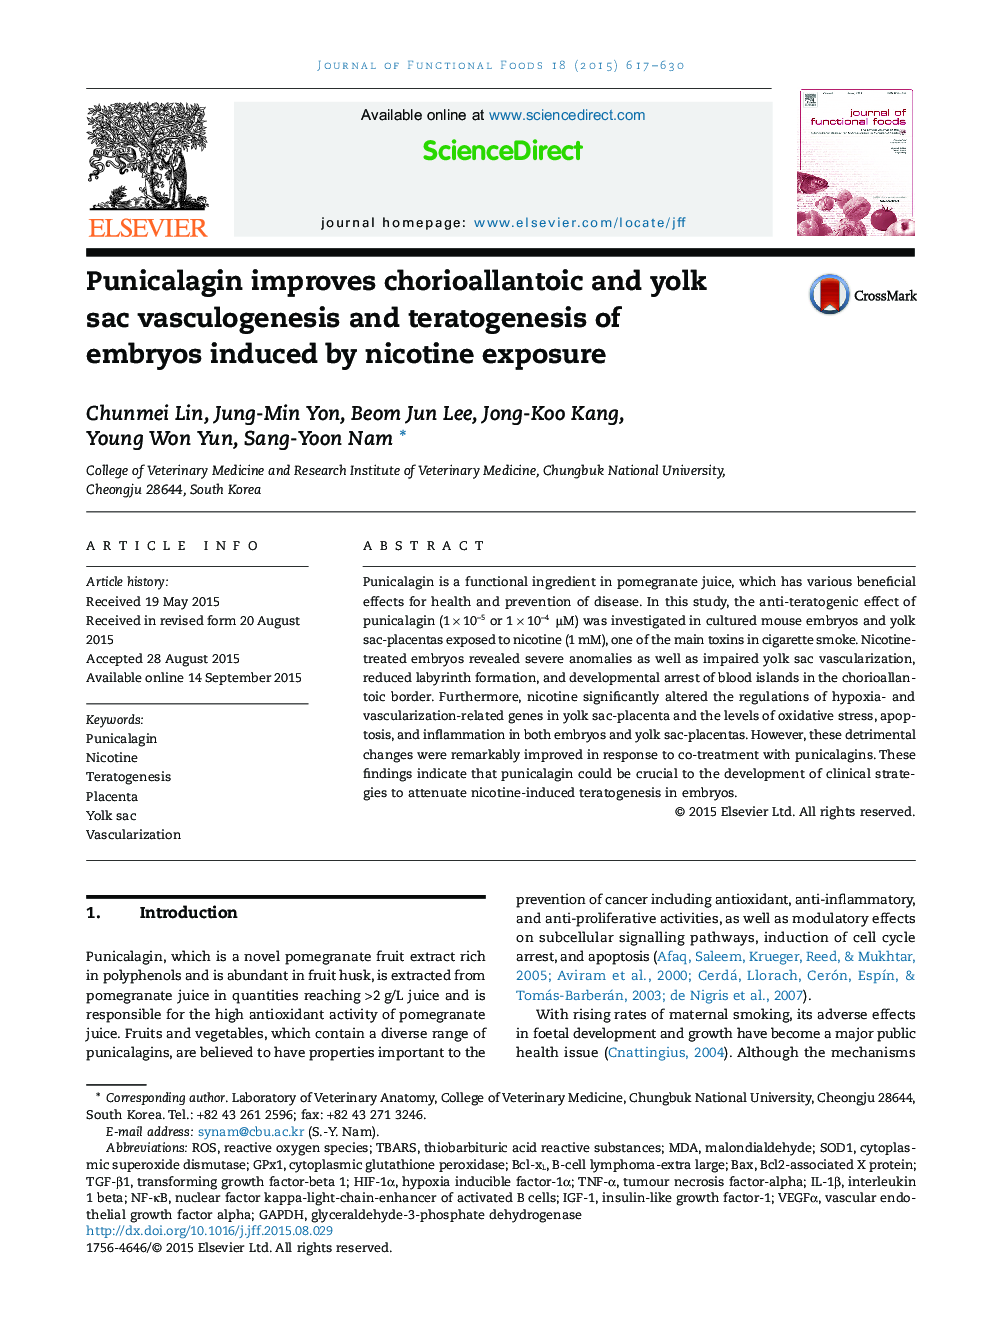 Punicalagin improves chorioallantoic and yolk sac vasculogenesis and teratogenesis of embryos induced by nicotine exposure